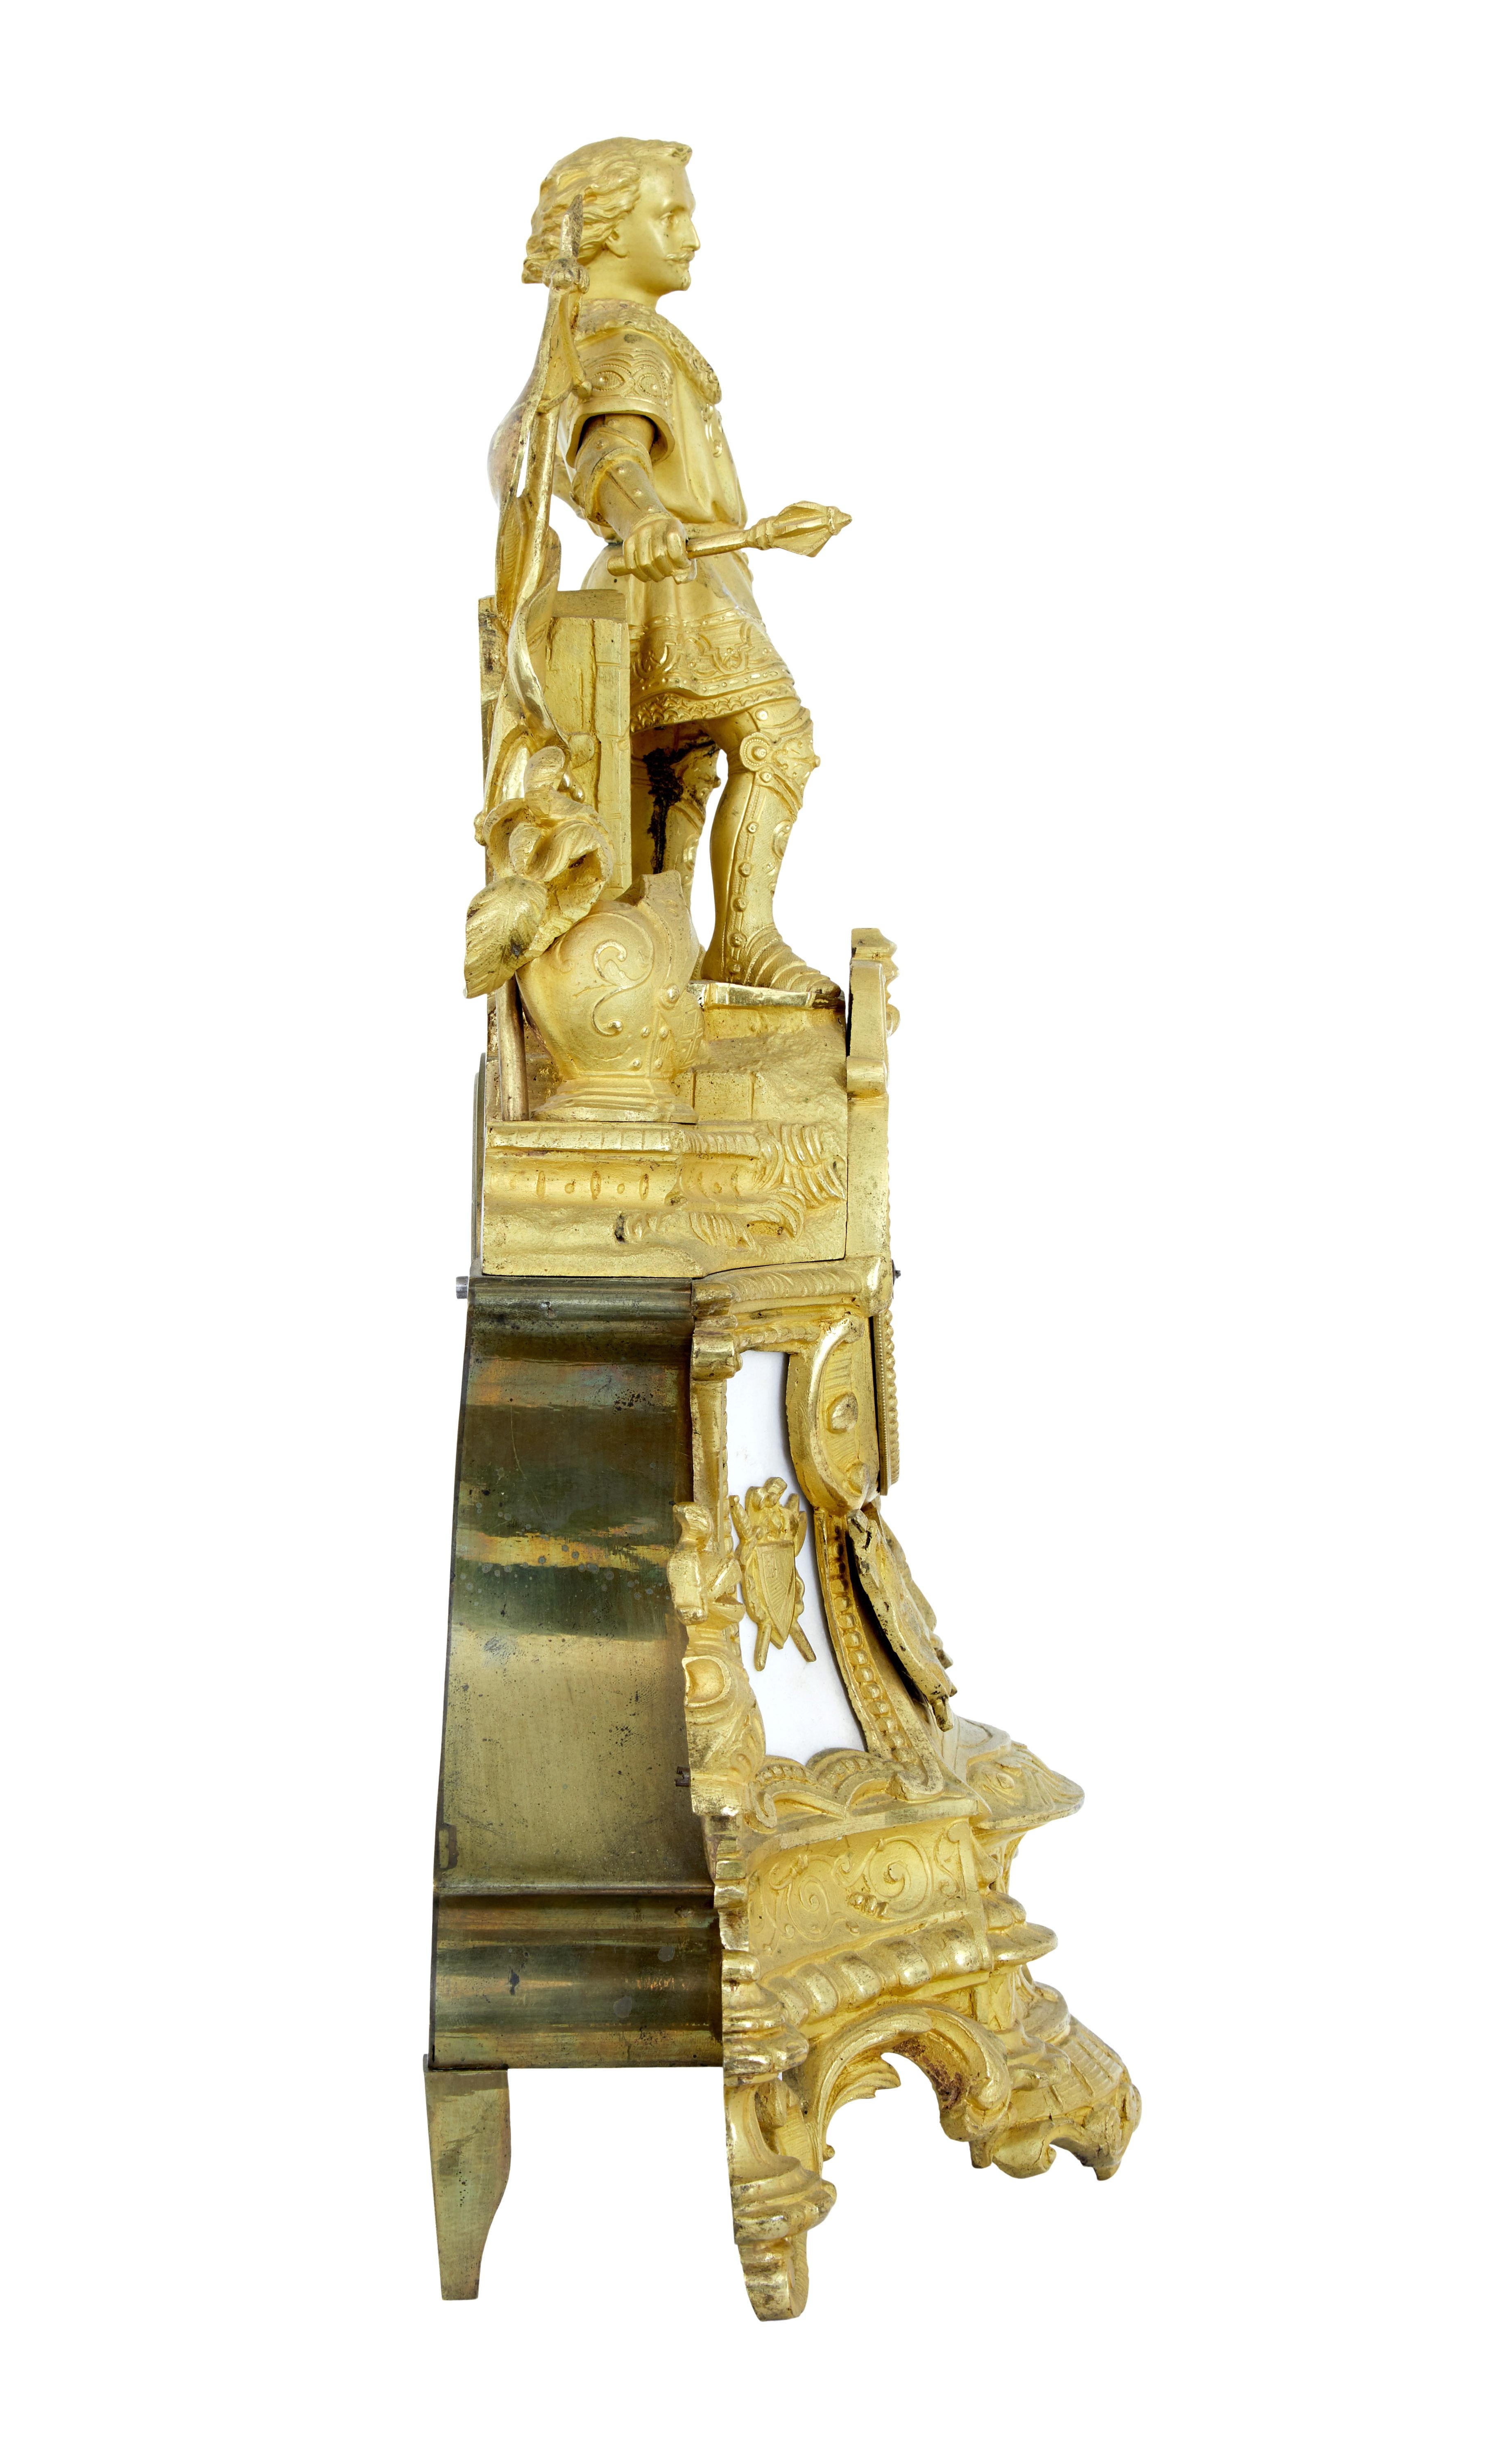 Baroque Revival 19th Century French Ormolu and Marble Figural Mantel Clock